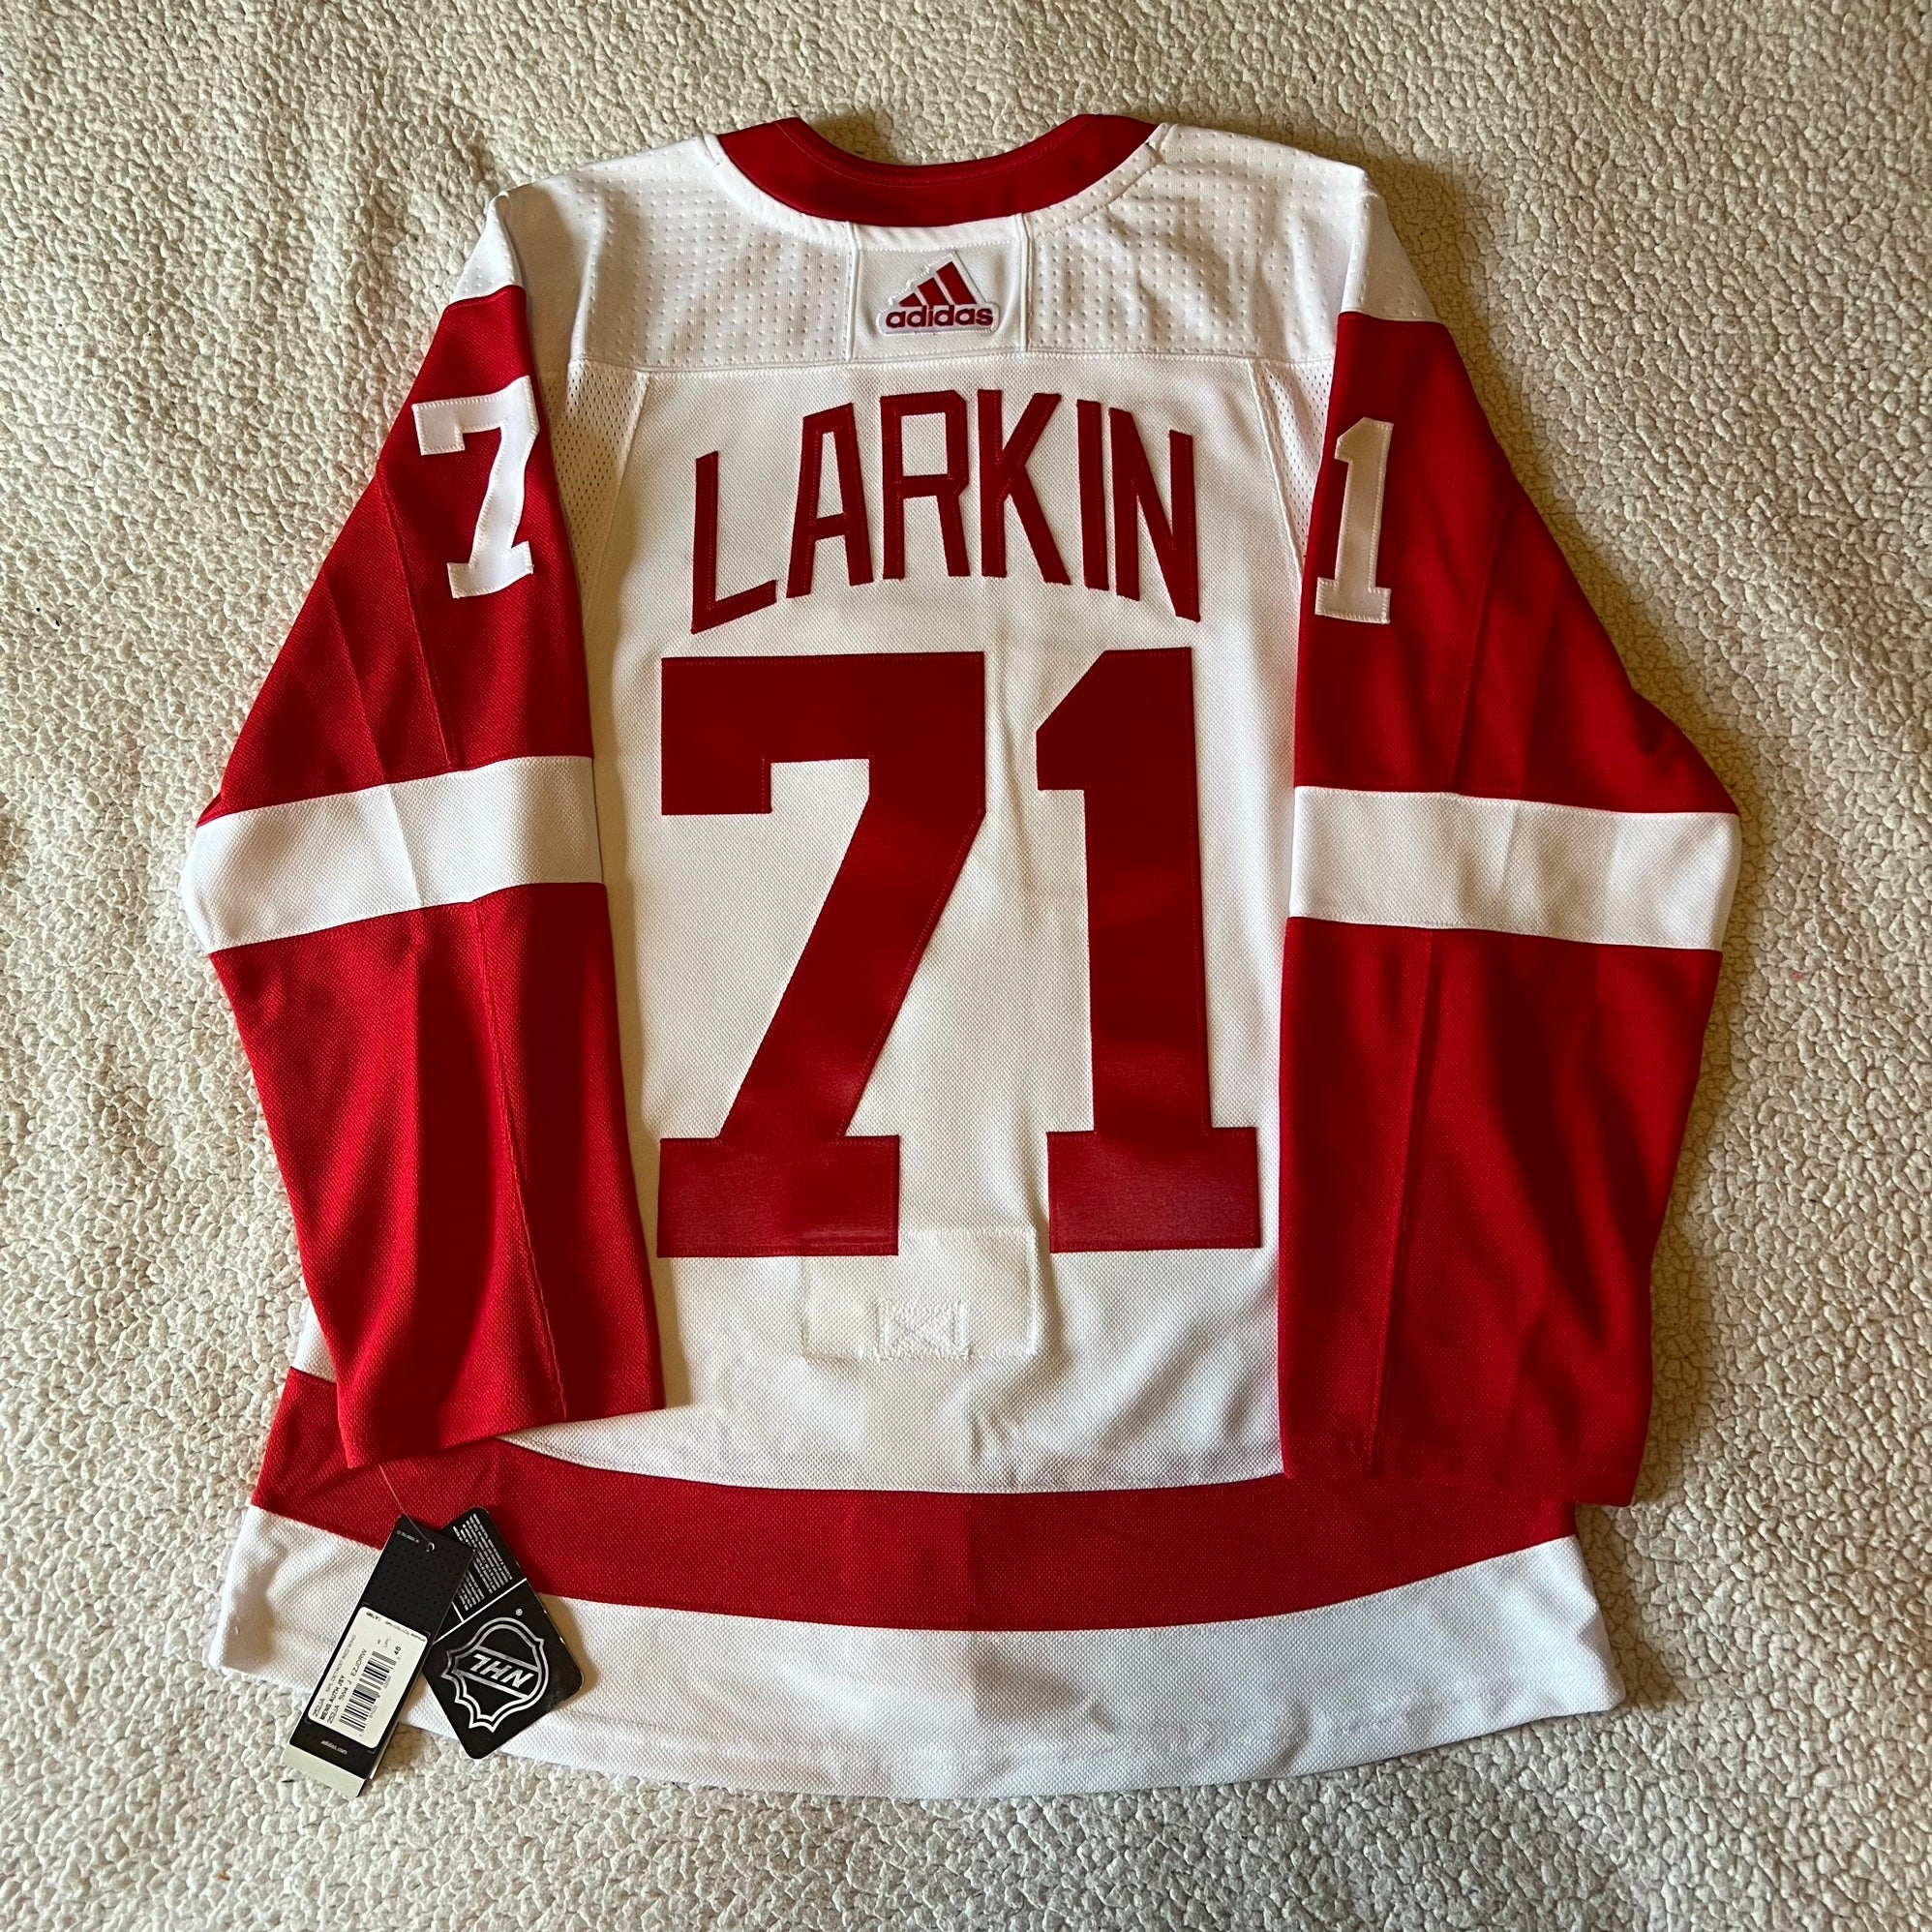 DYLAN LARKIN Signed Detroit Red Wings Red Adidas PRO Jersey